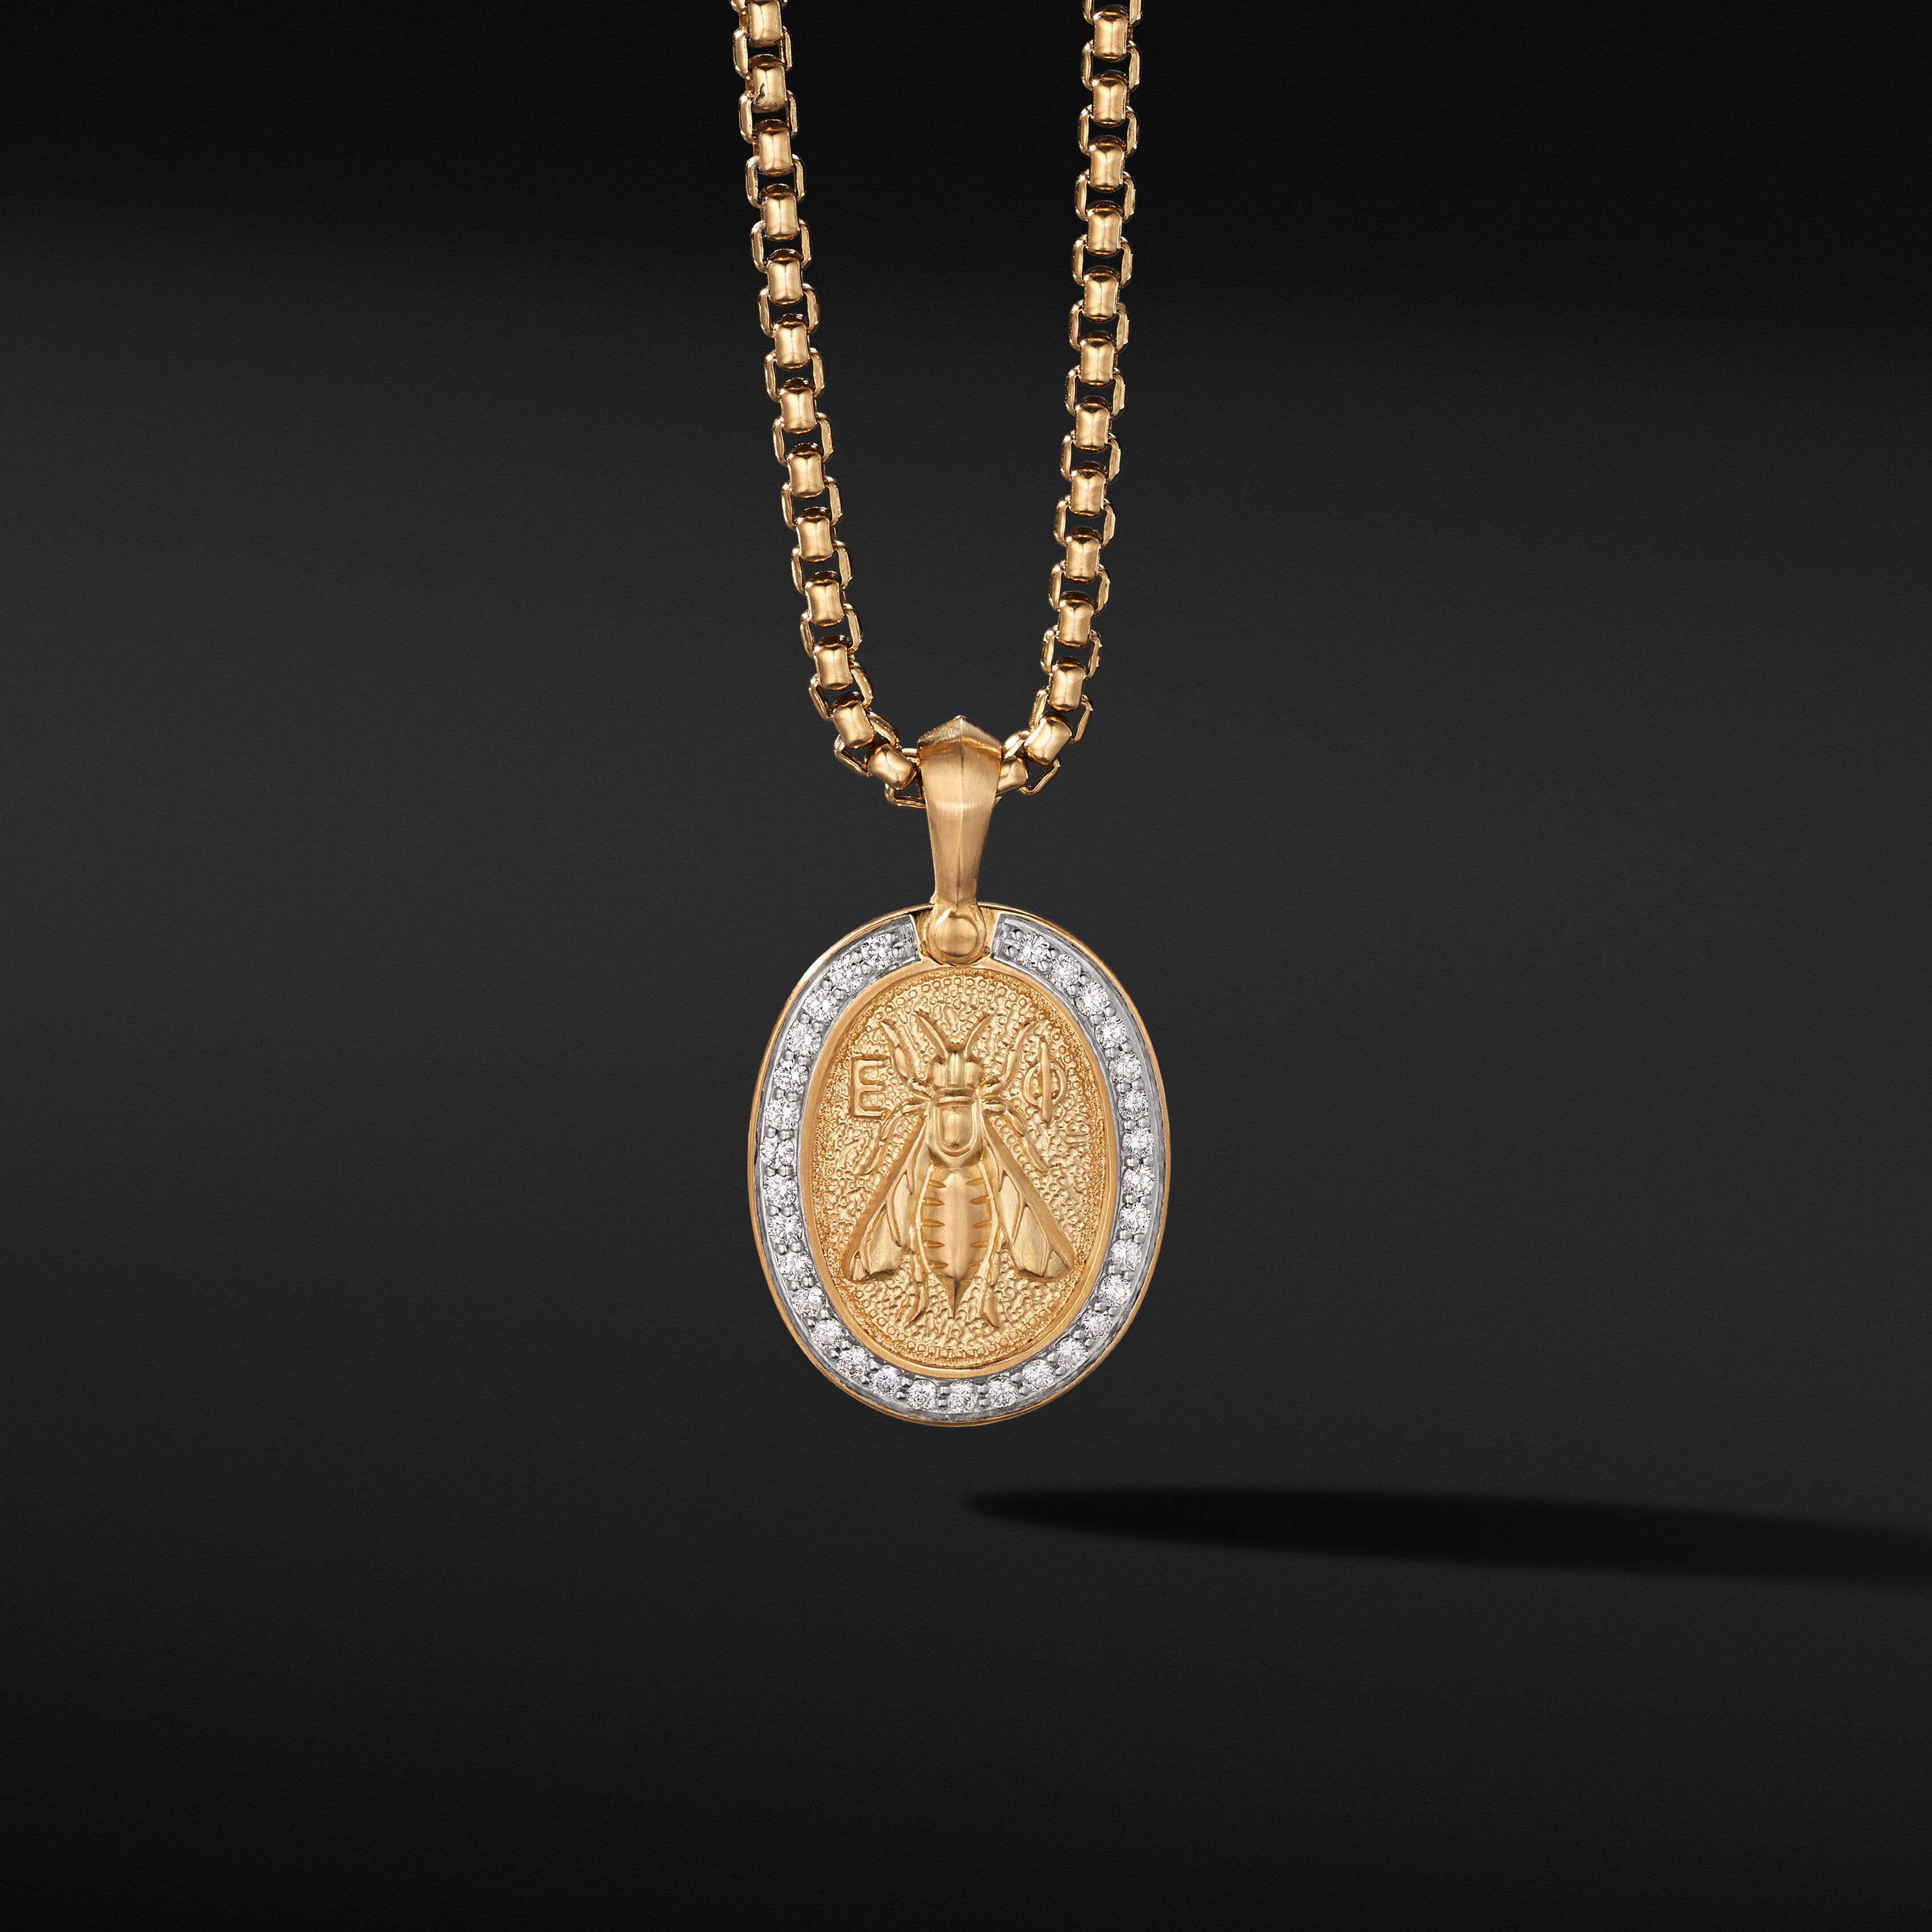 Petrvs® Bee Amulet in 18K Yellow Gold with Pavé Diamonds